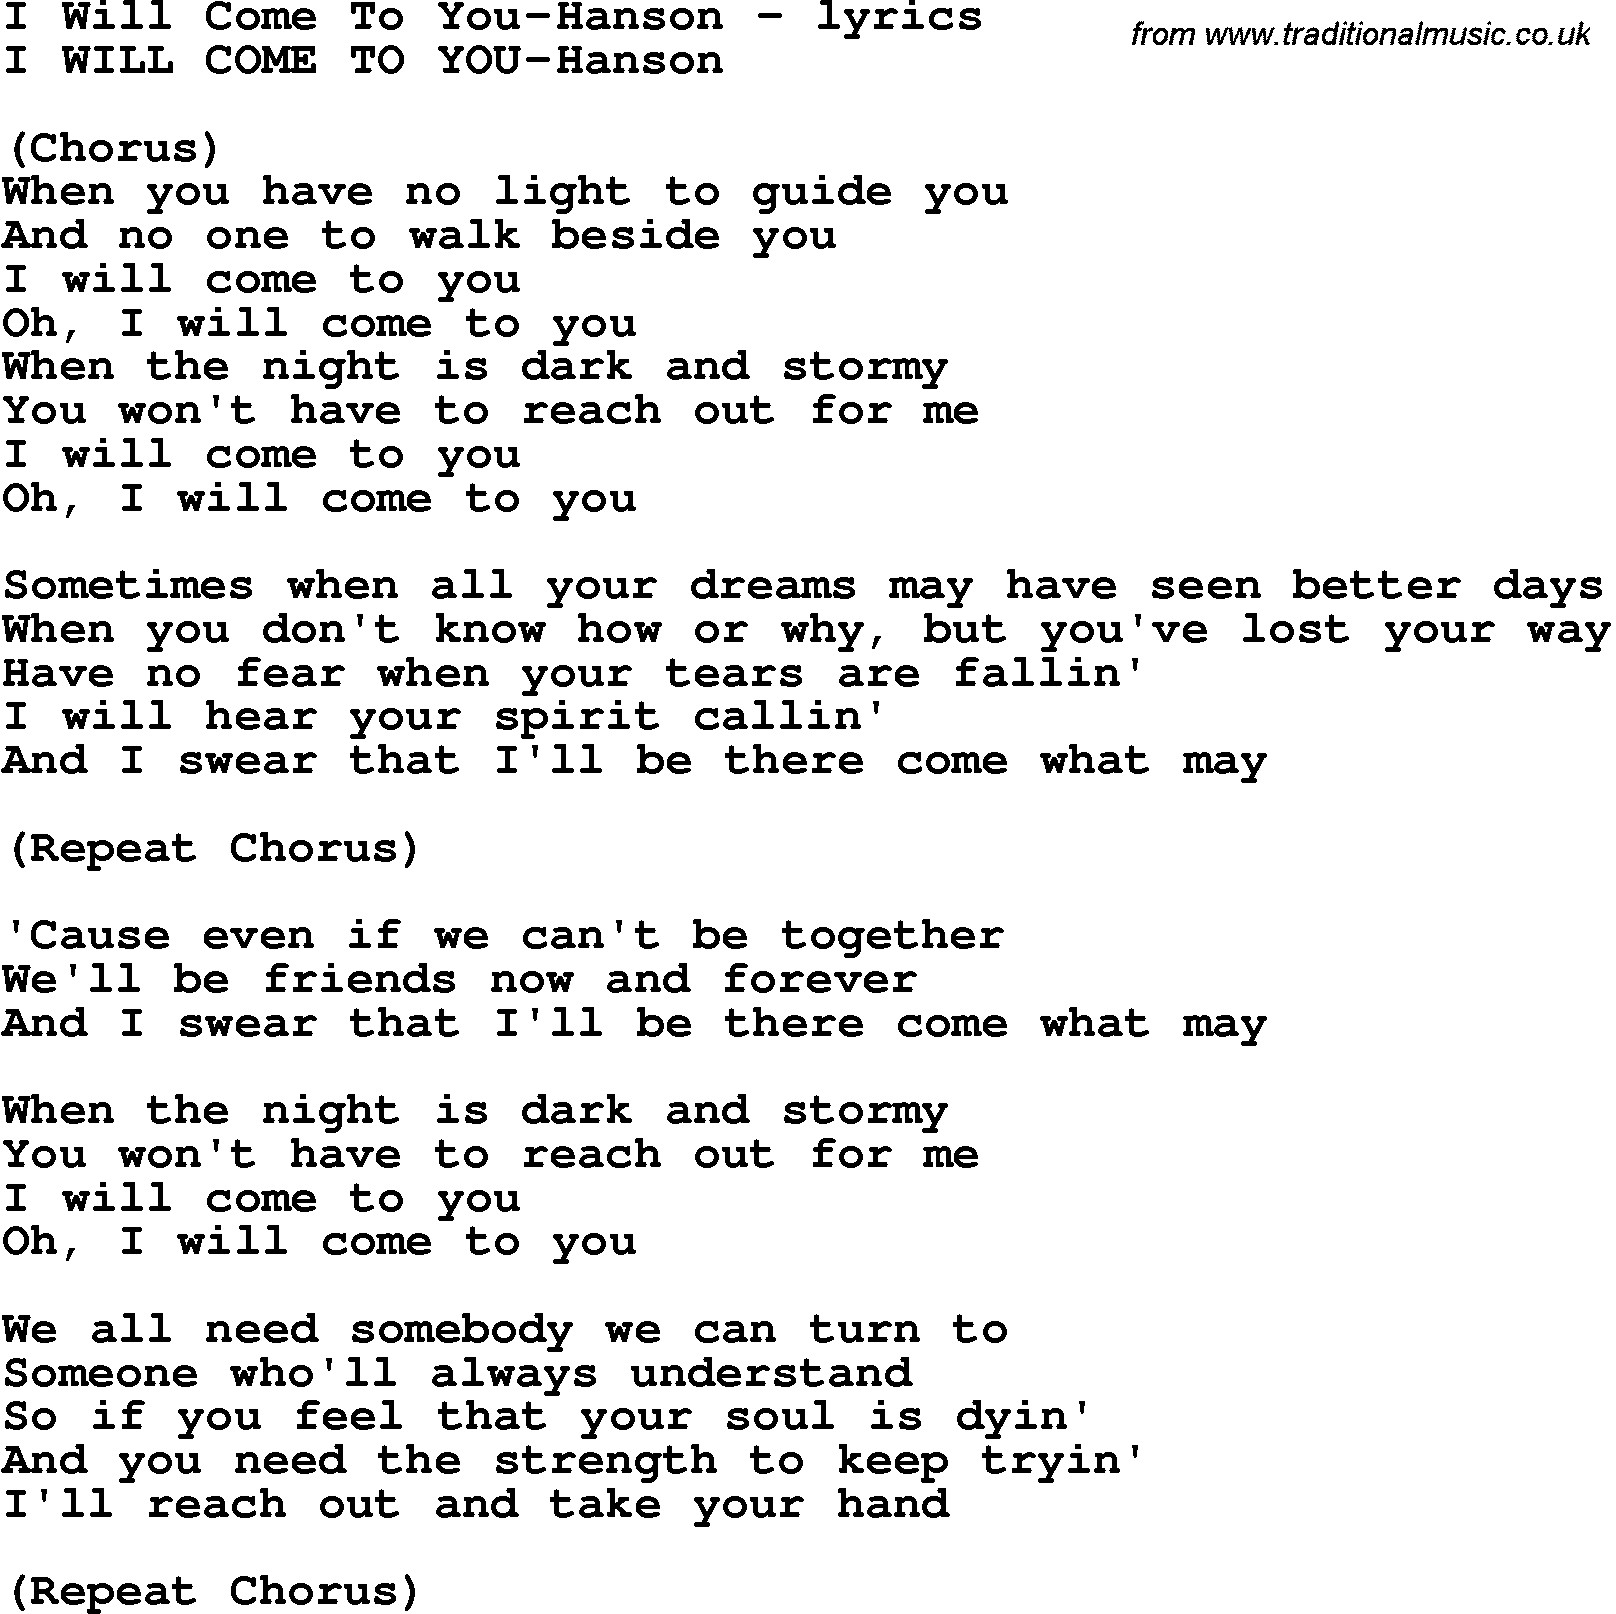 Love Song Lyrics for: I Will Come To You-Hanson